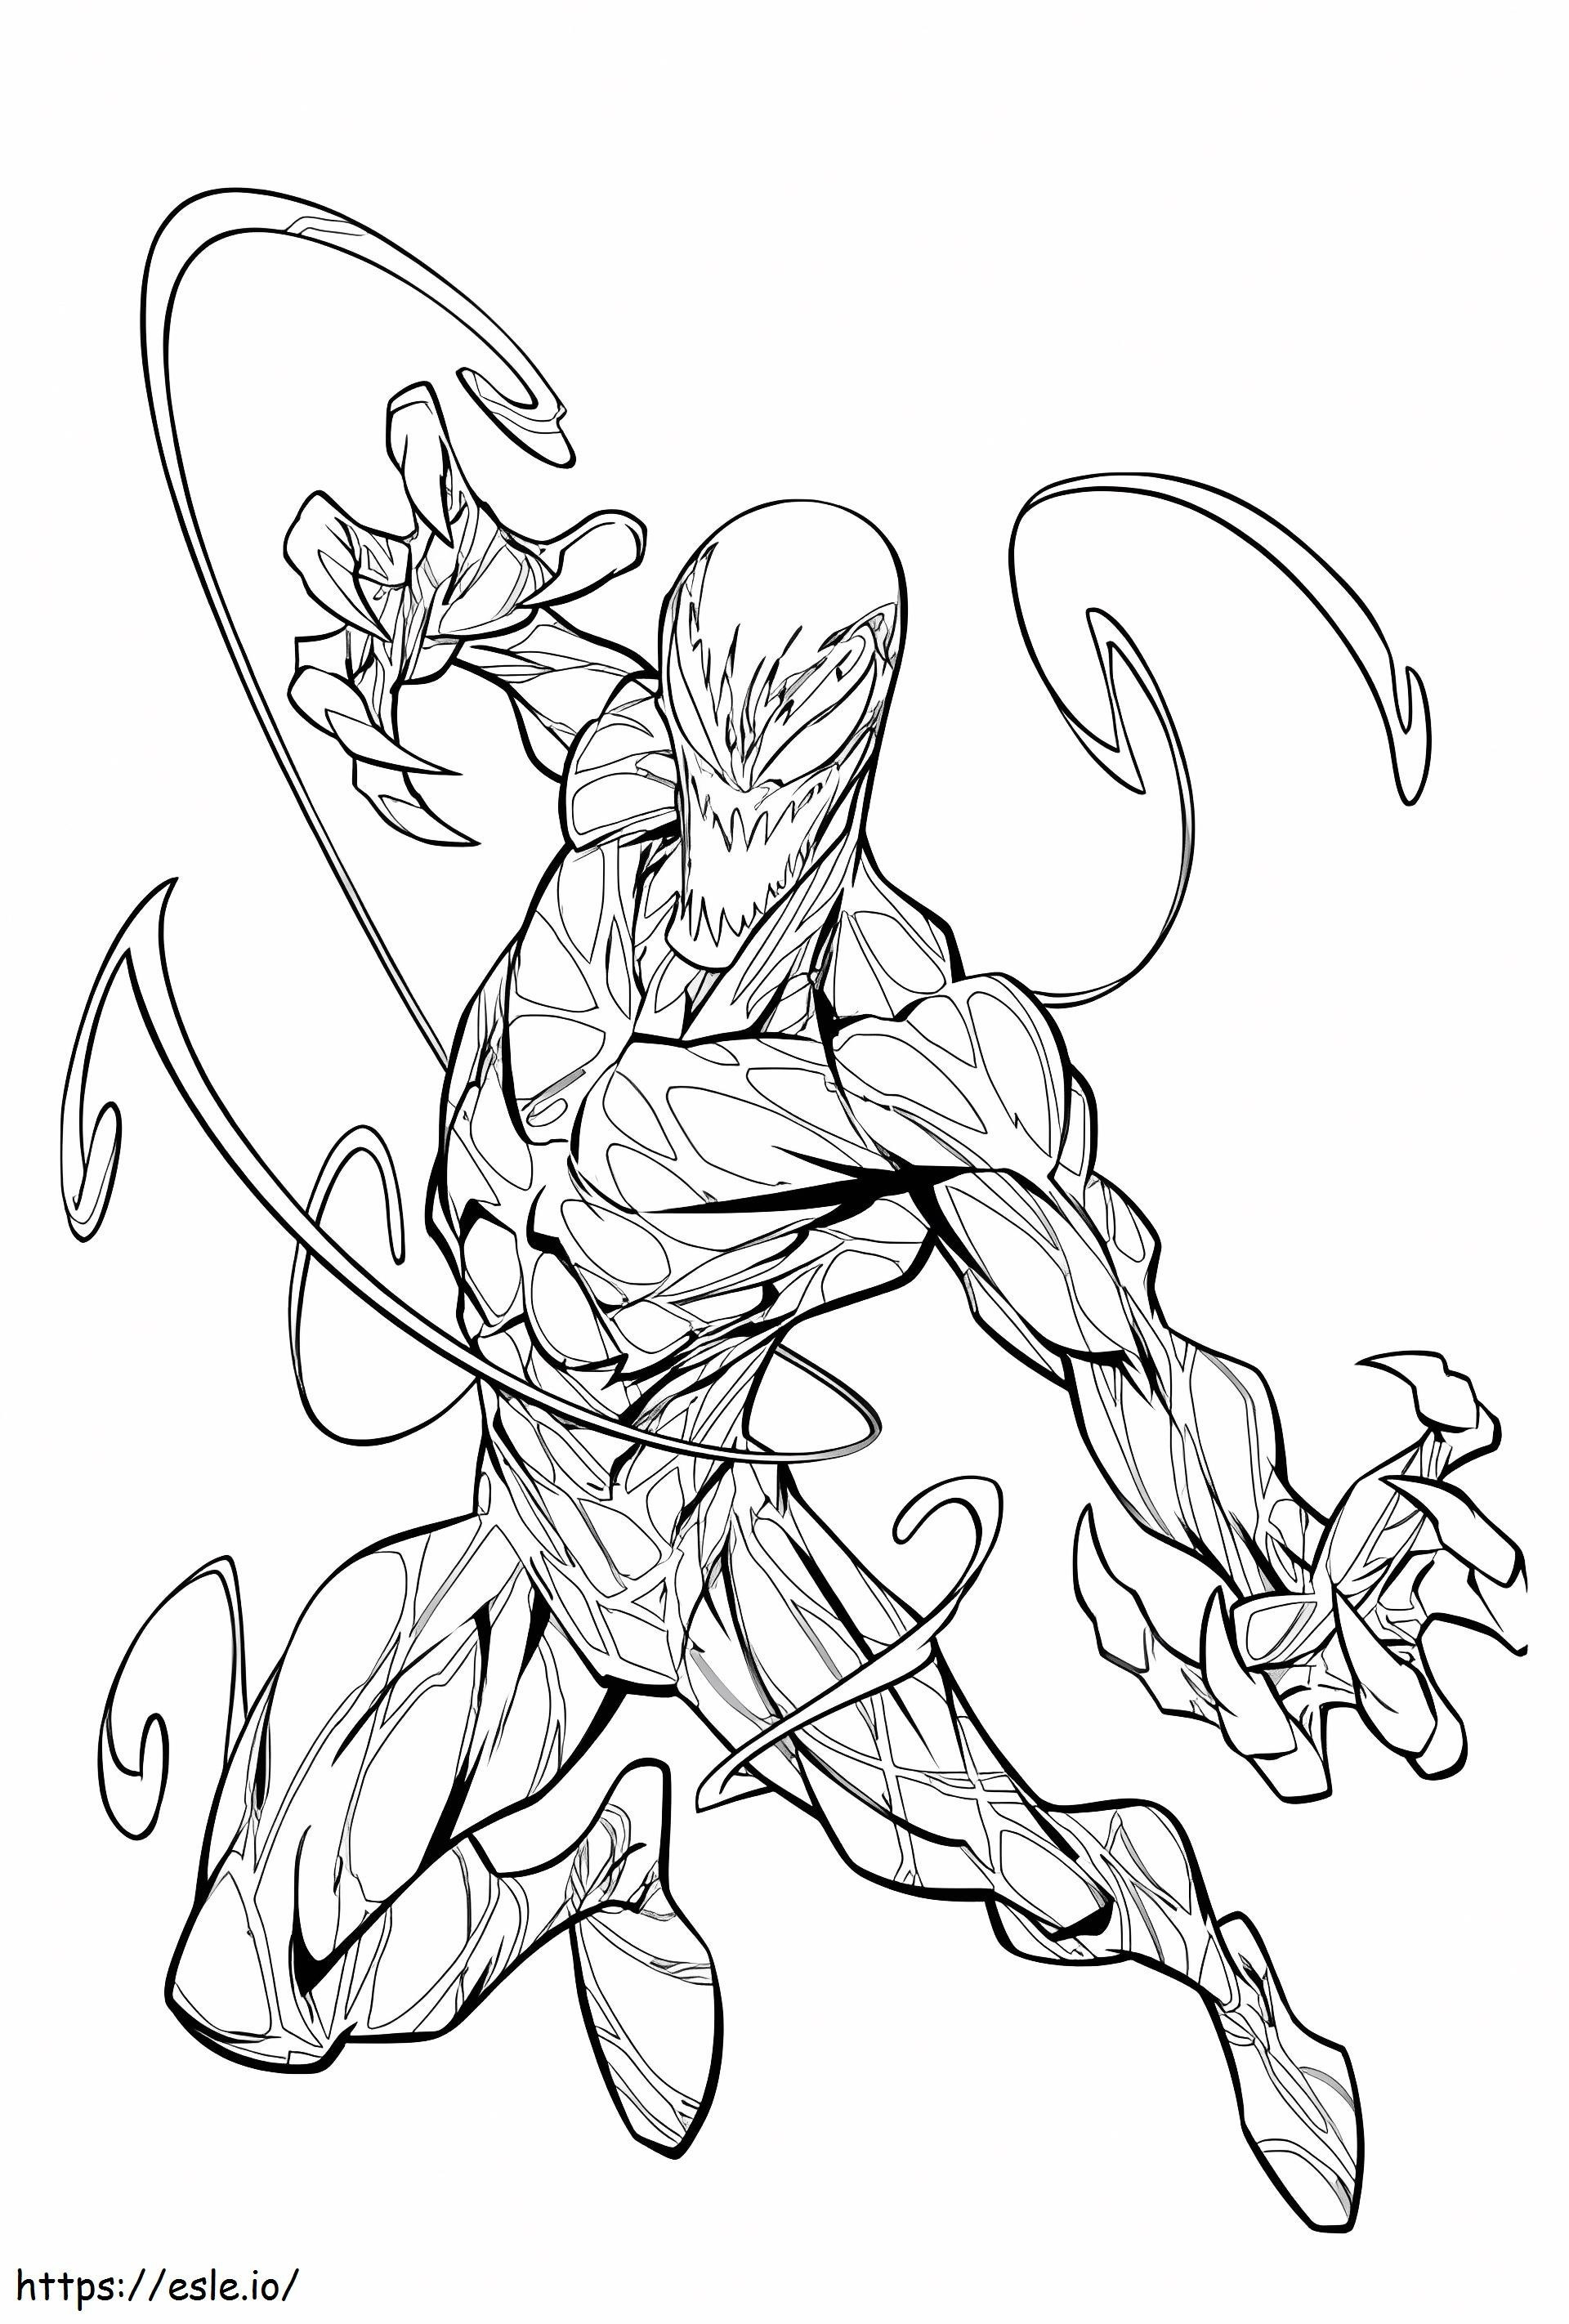 Cartoon Carnage coloring page